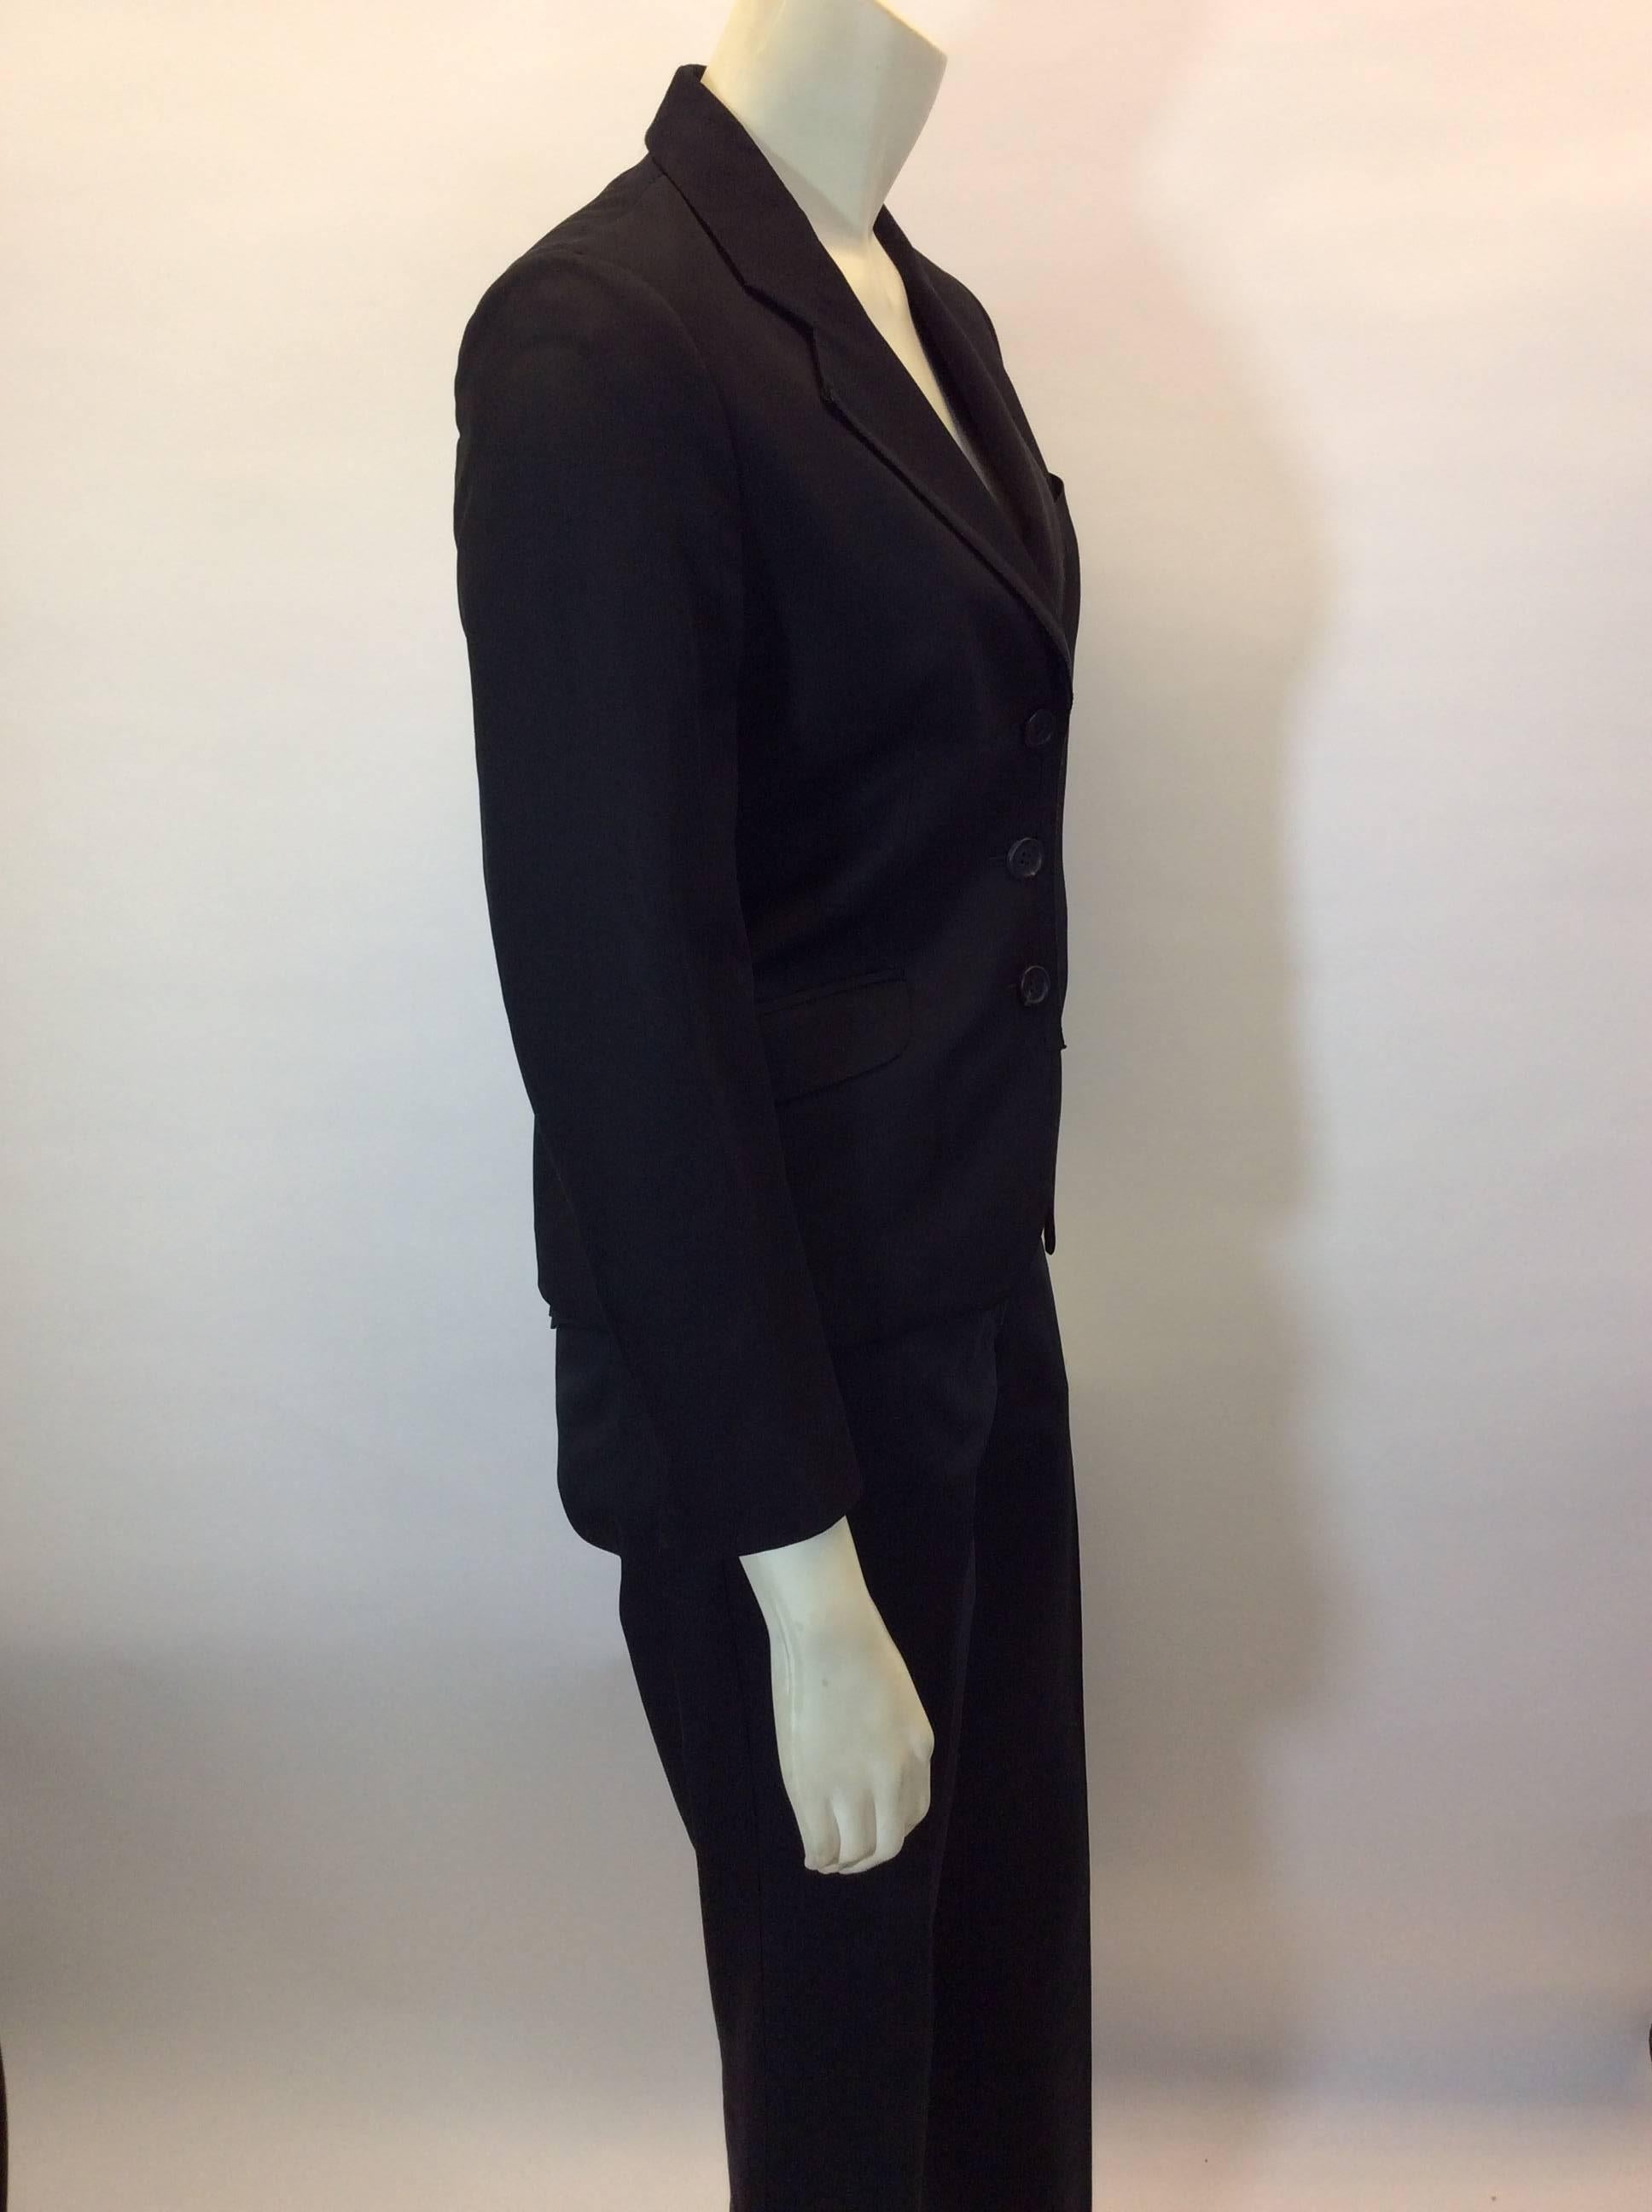 Miu Miu Black Pantsuit with 3 Button Blazer In Excellent Condition For Sale In Narberth, PA